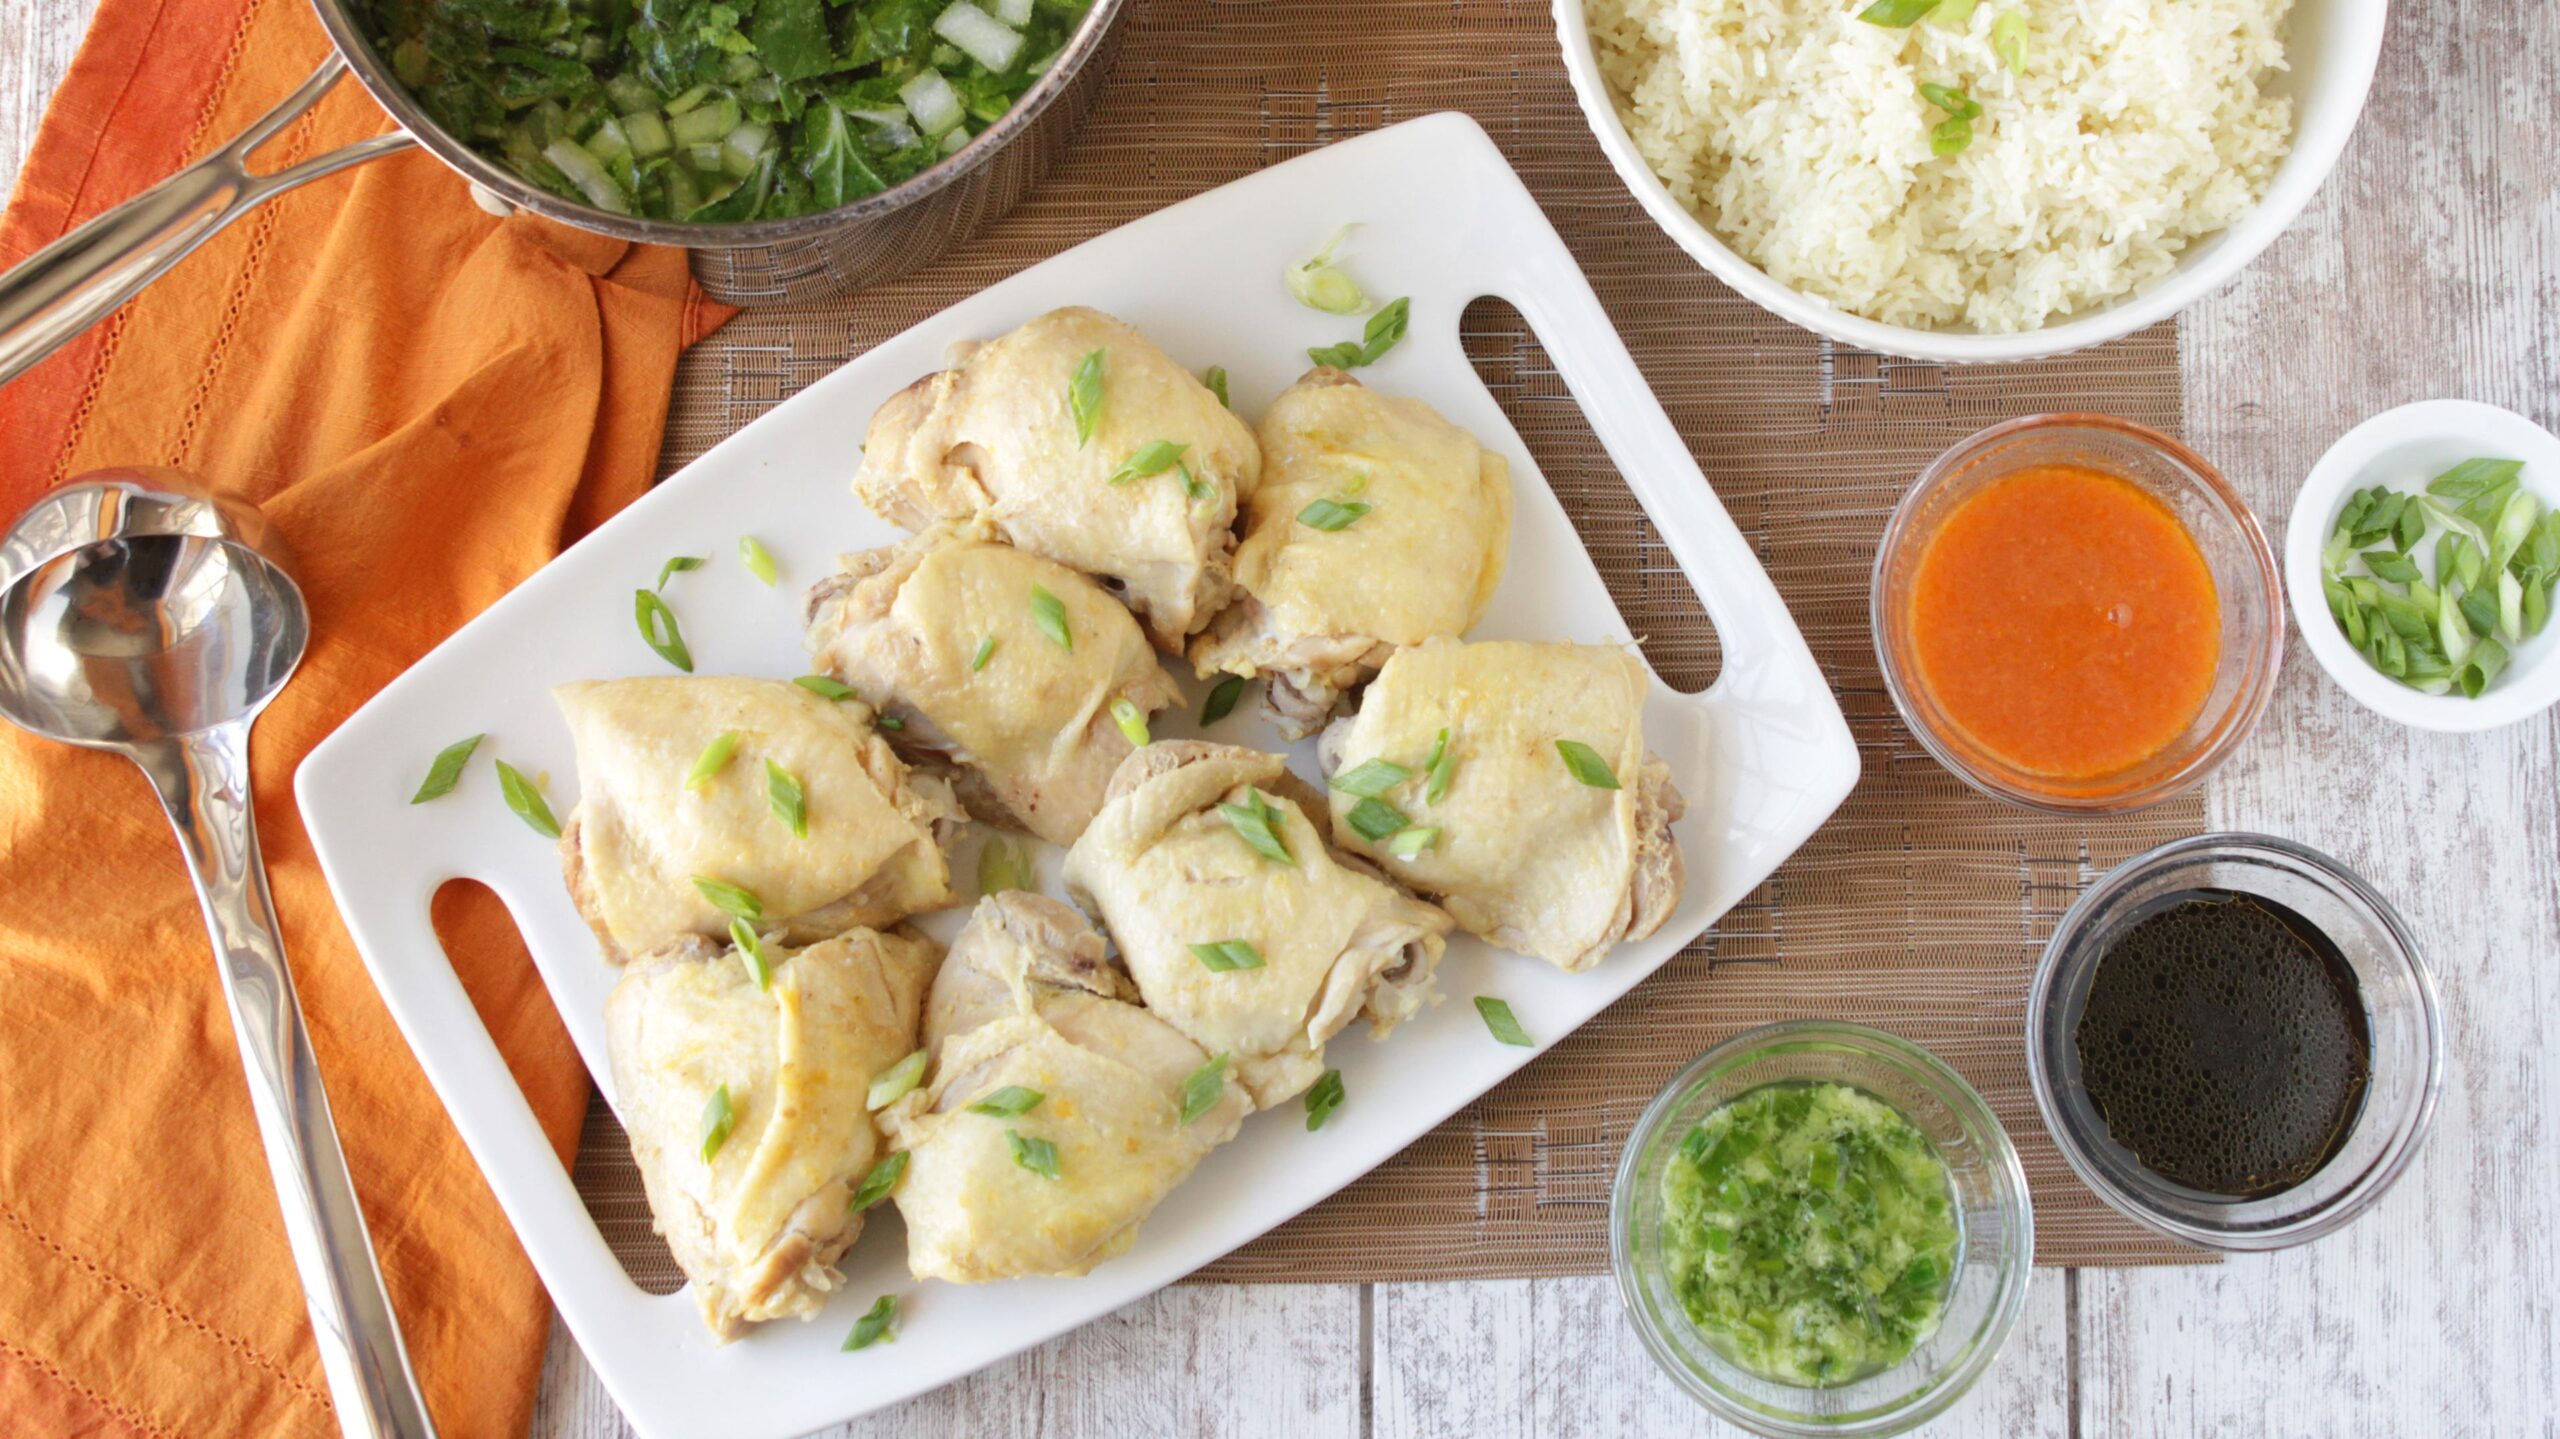  Indulge in the ultimate comfort food with this Instant Pot Hainanese chicken and rice dish.